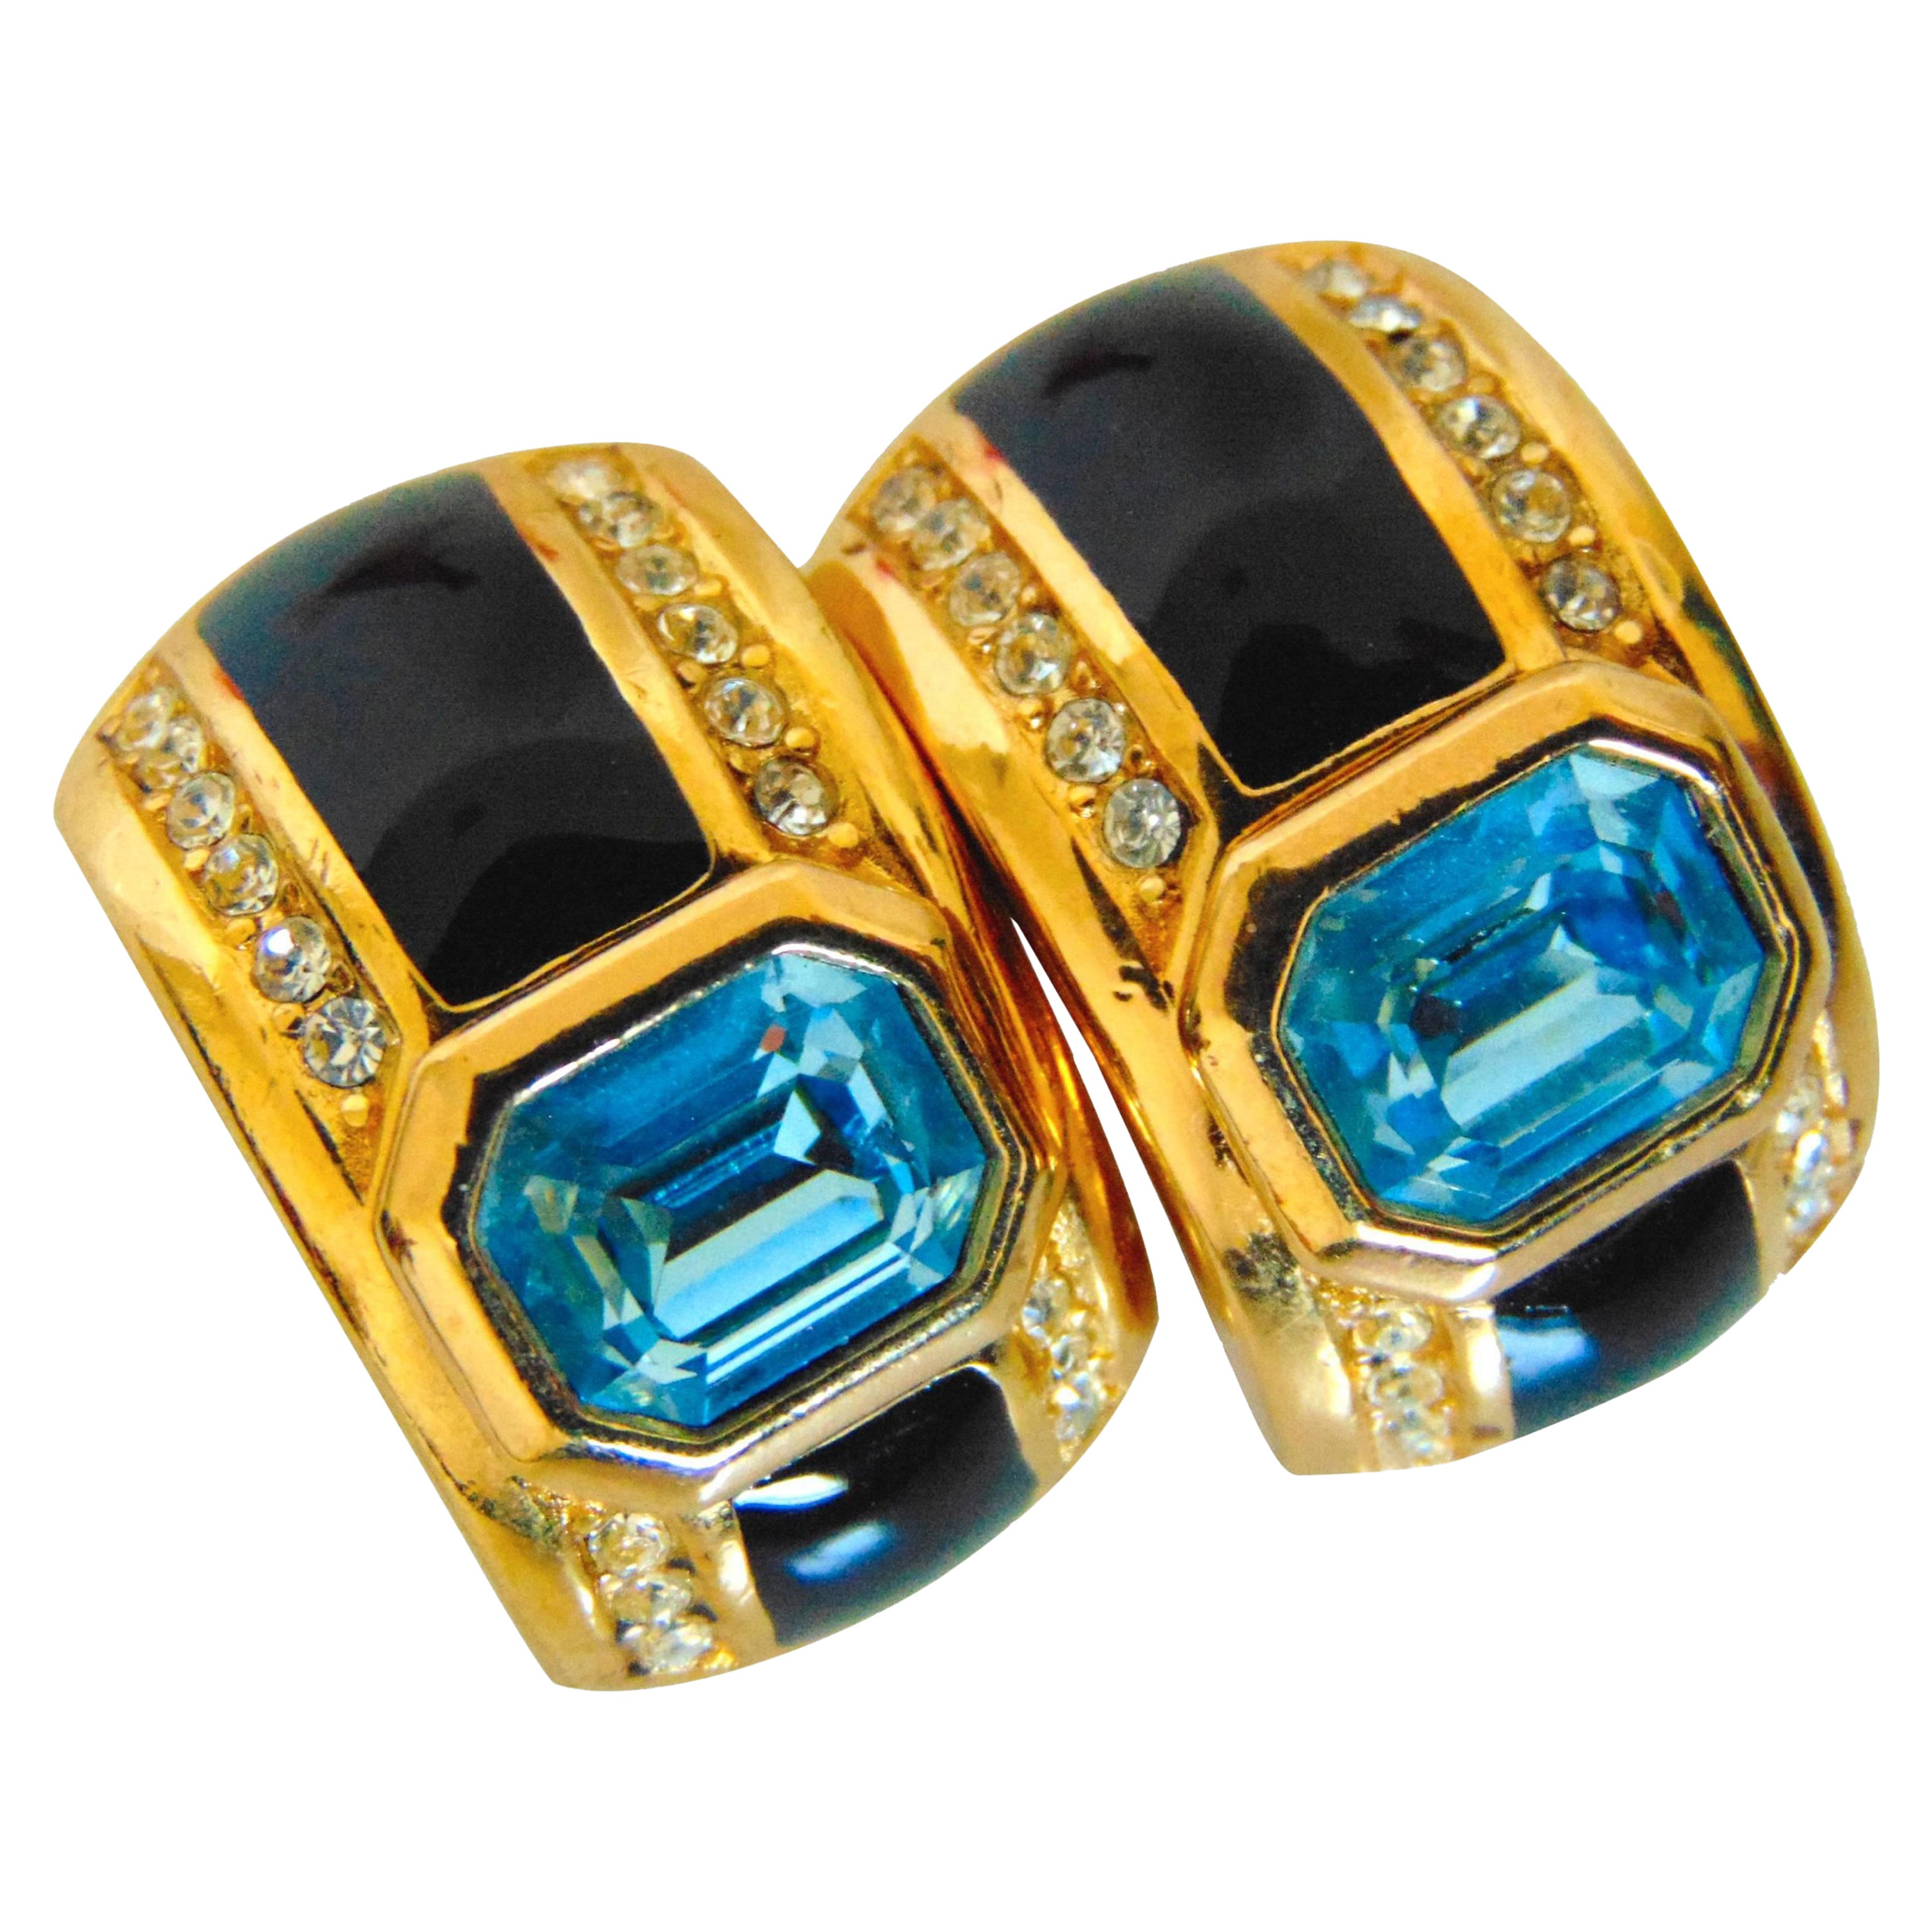 Christian Dior Art Deco Earrings with Faux Sapphire Topaz Crystals 1980s